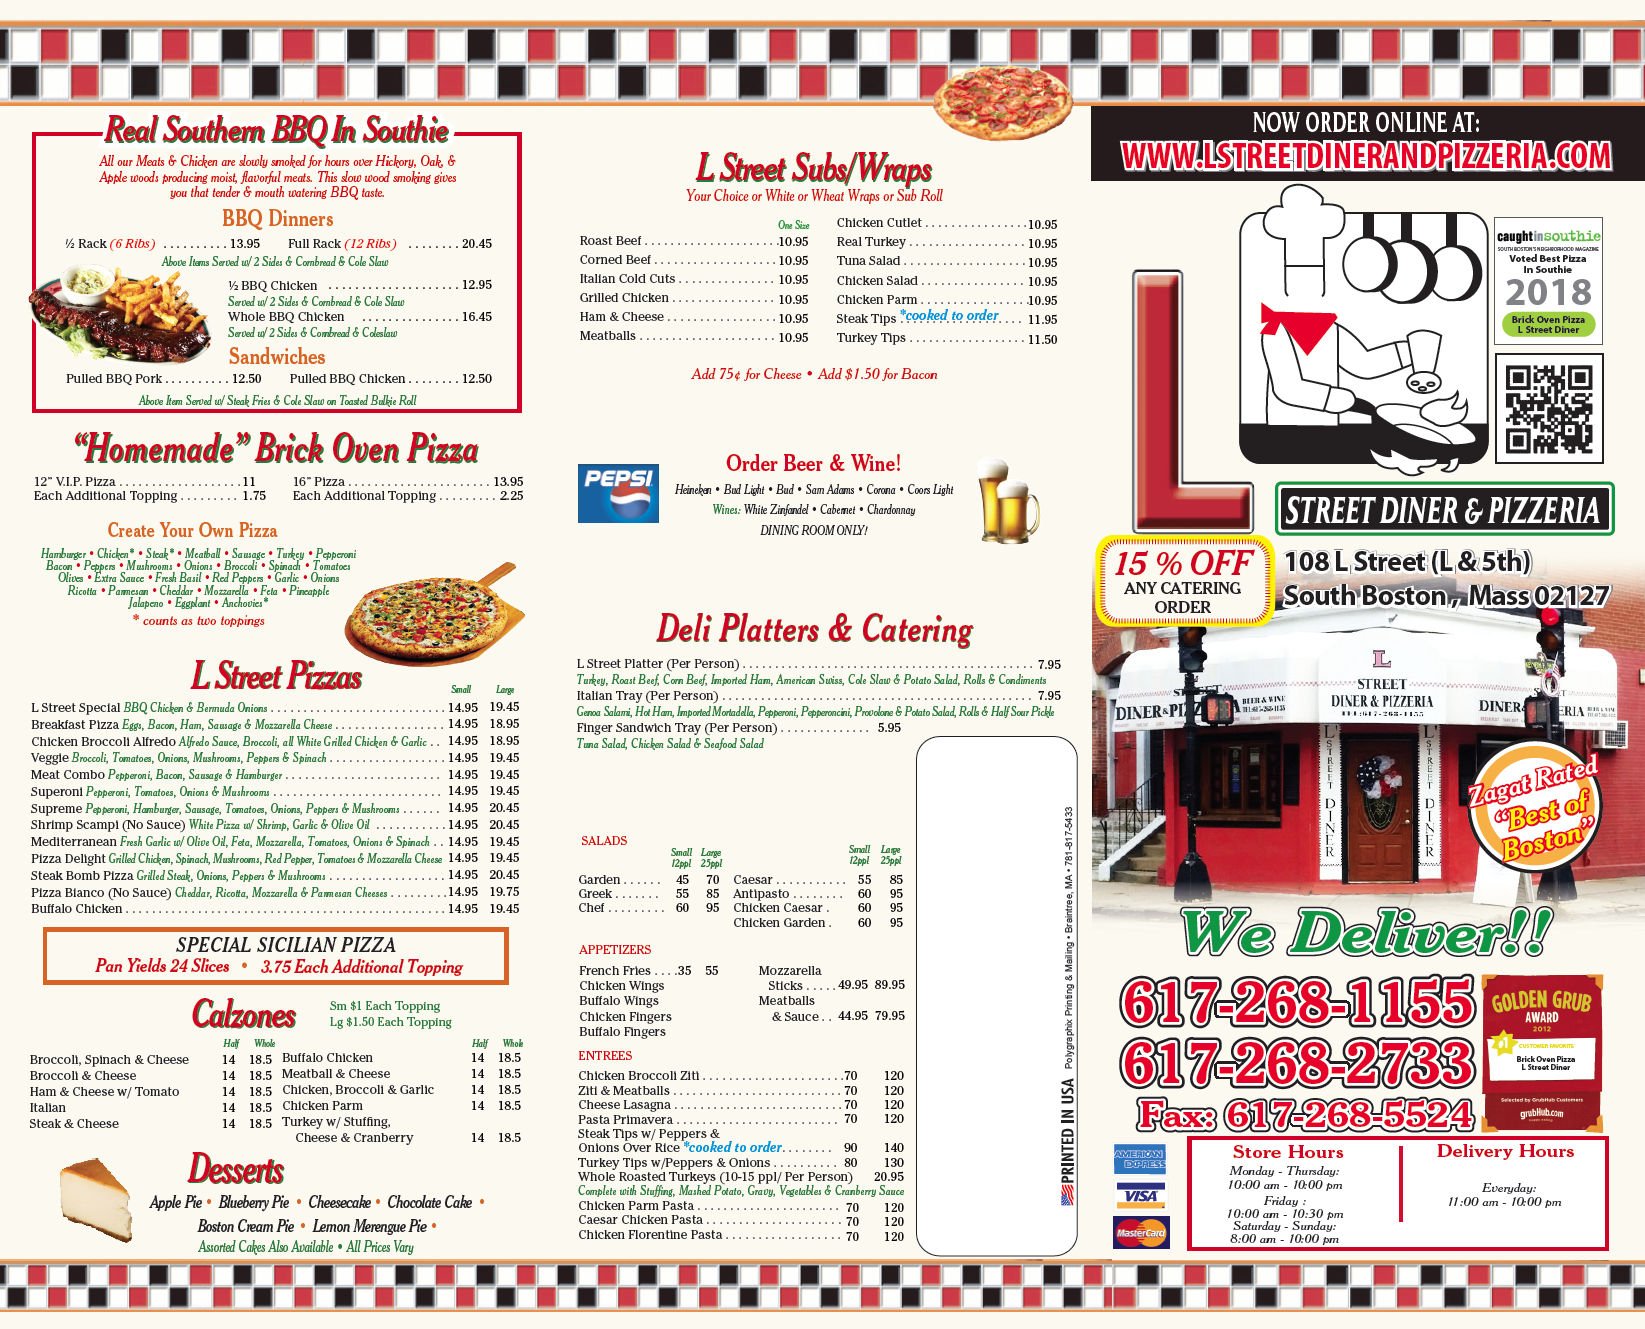 LStreet diner and pizzeria 